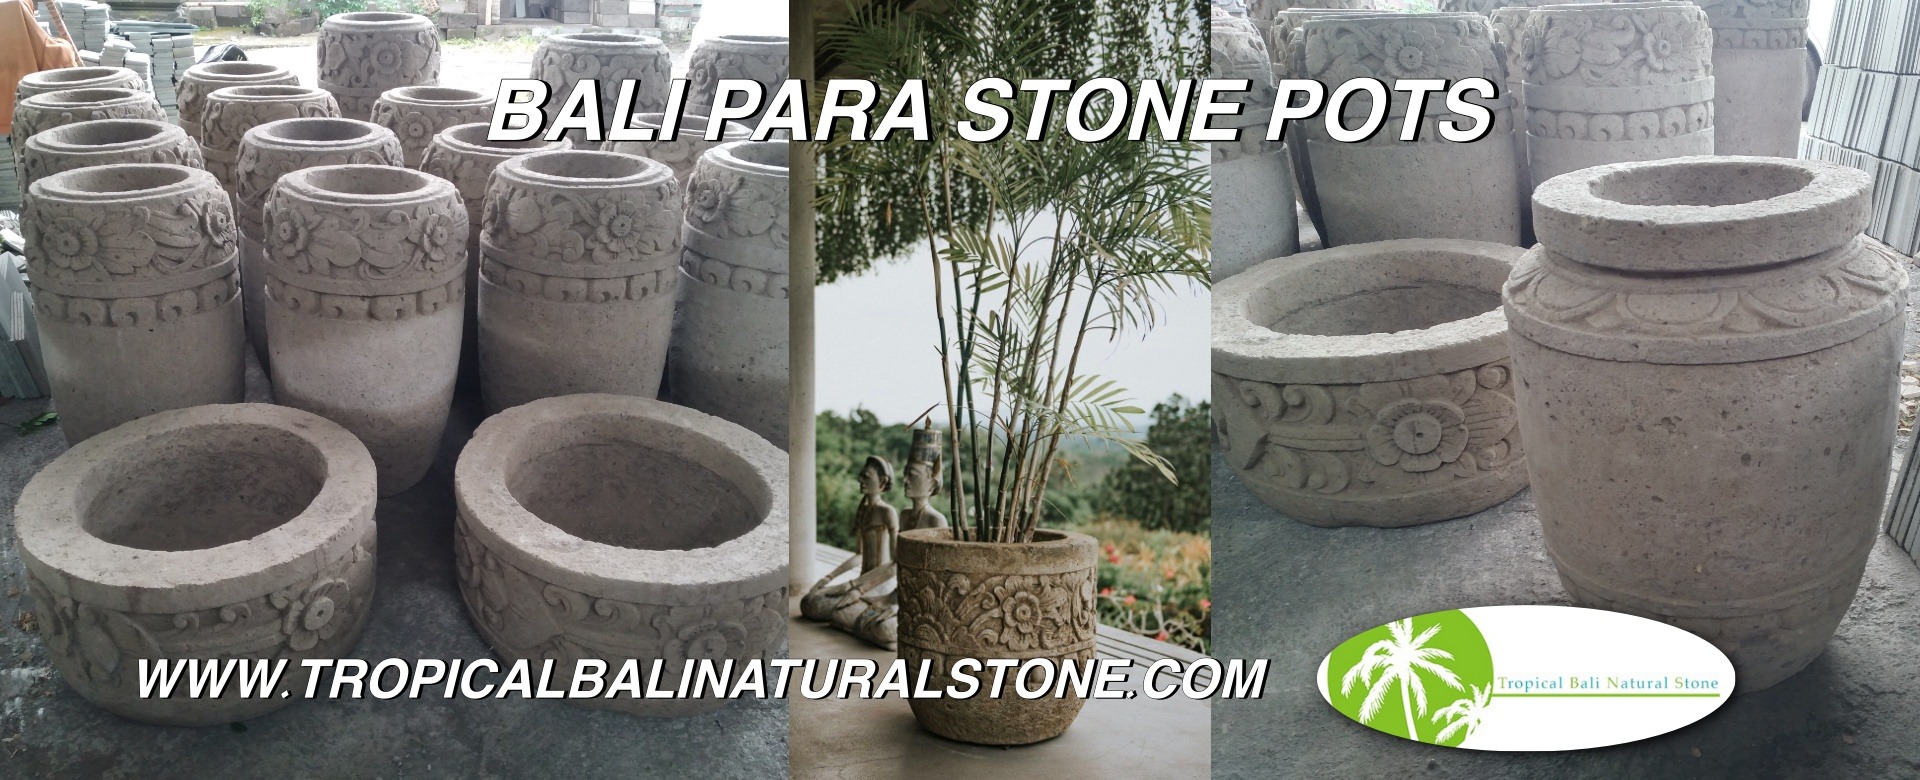 Bali Stone Garden Pots,Hand carved bowls,stone bowls.